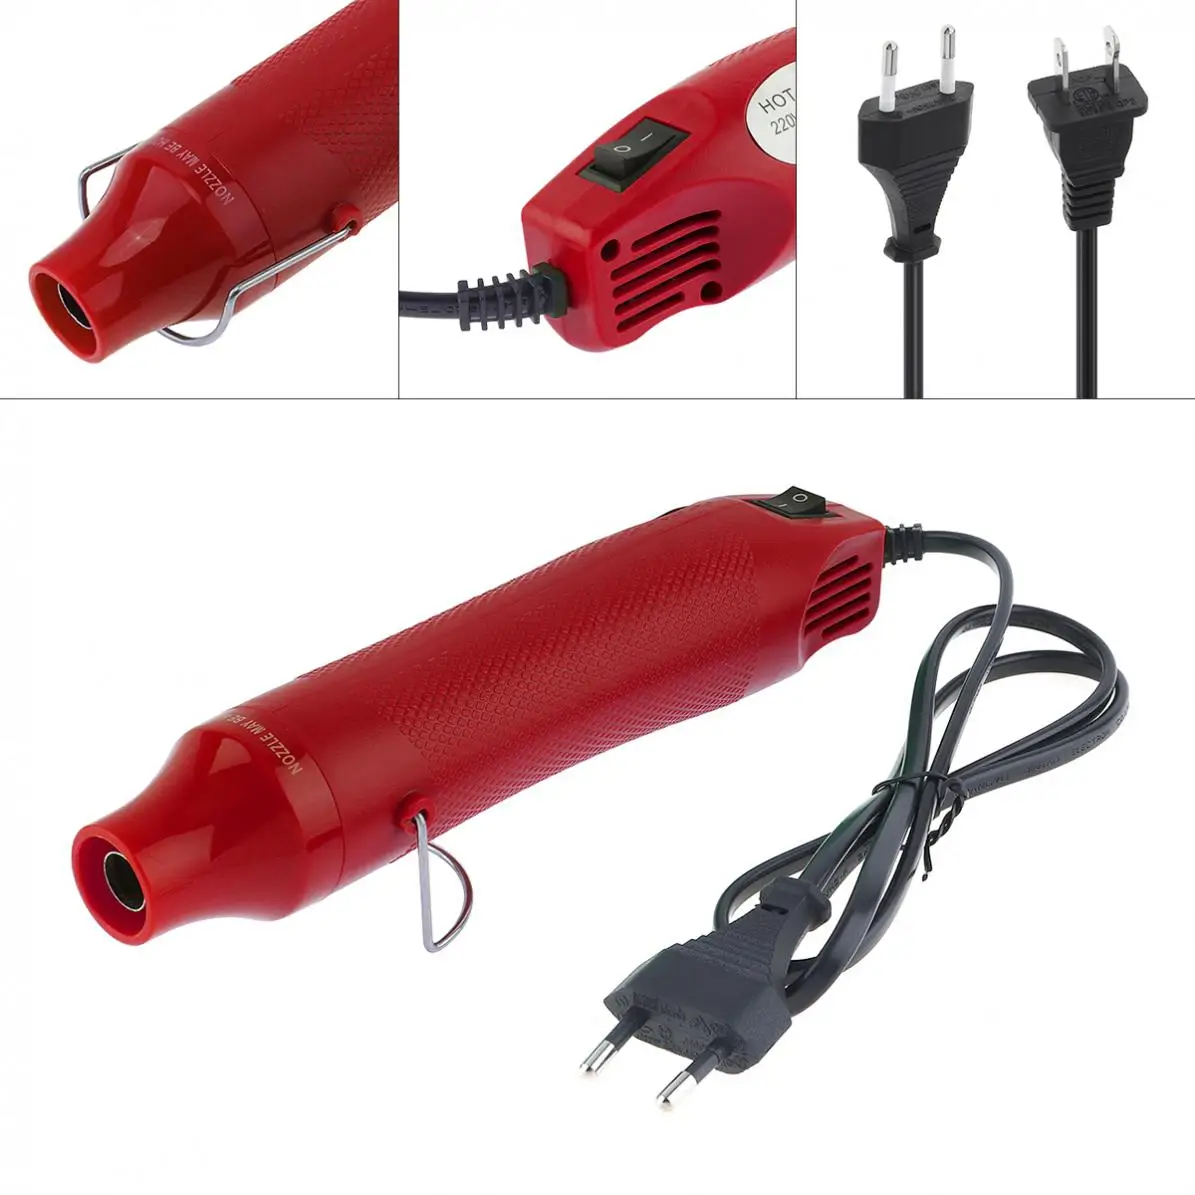 110V / 220V 300W Heat Gun Hot Air Electric Blower with Shrink Plastic Surface EU US Plug for Heating DIY Accessories